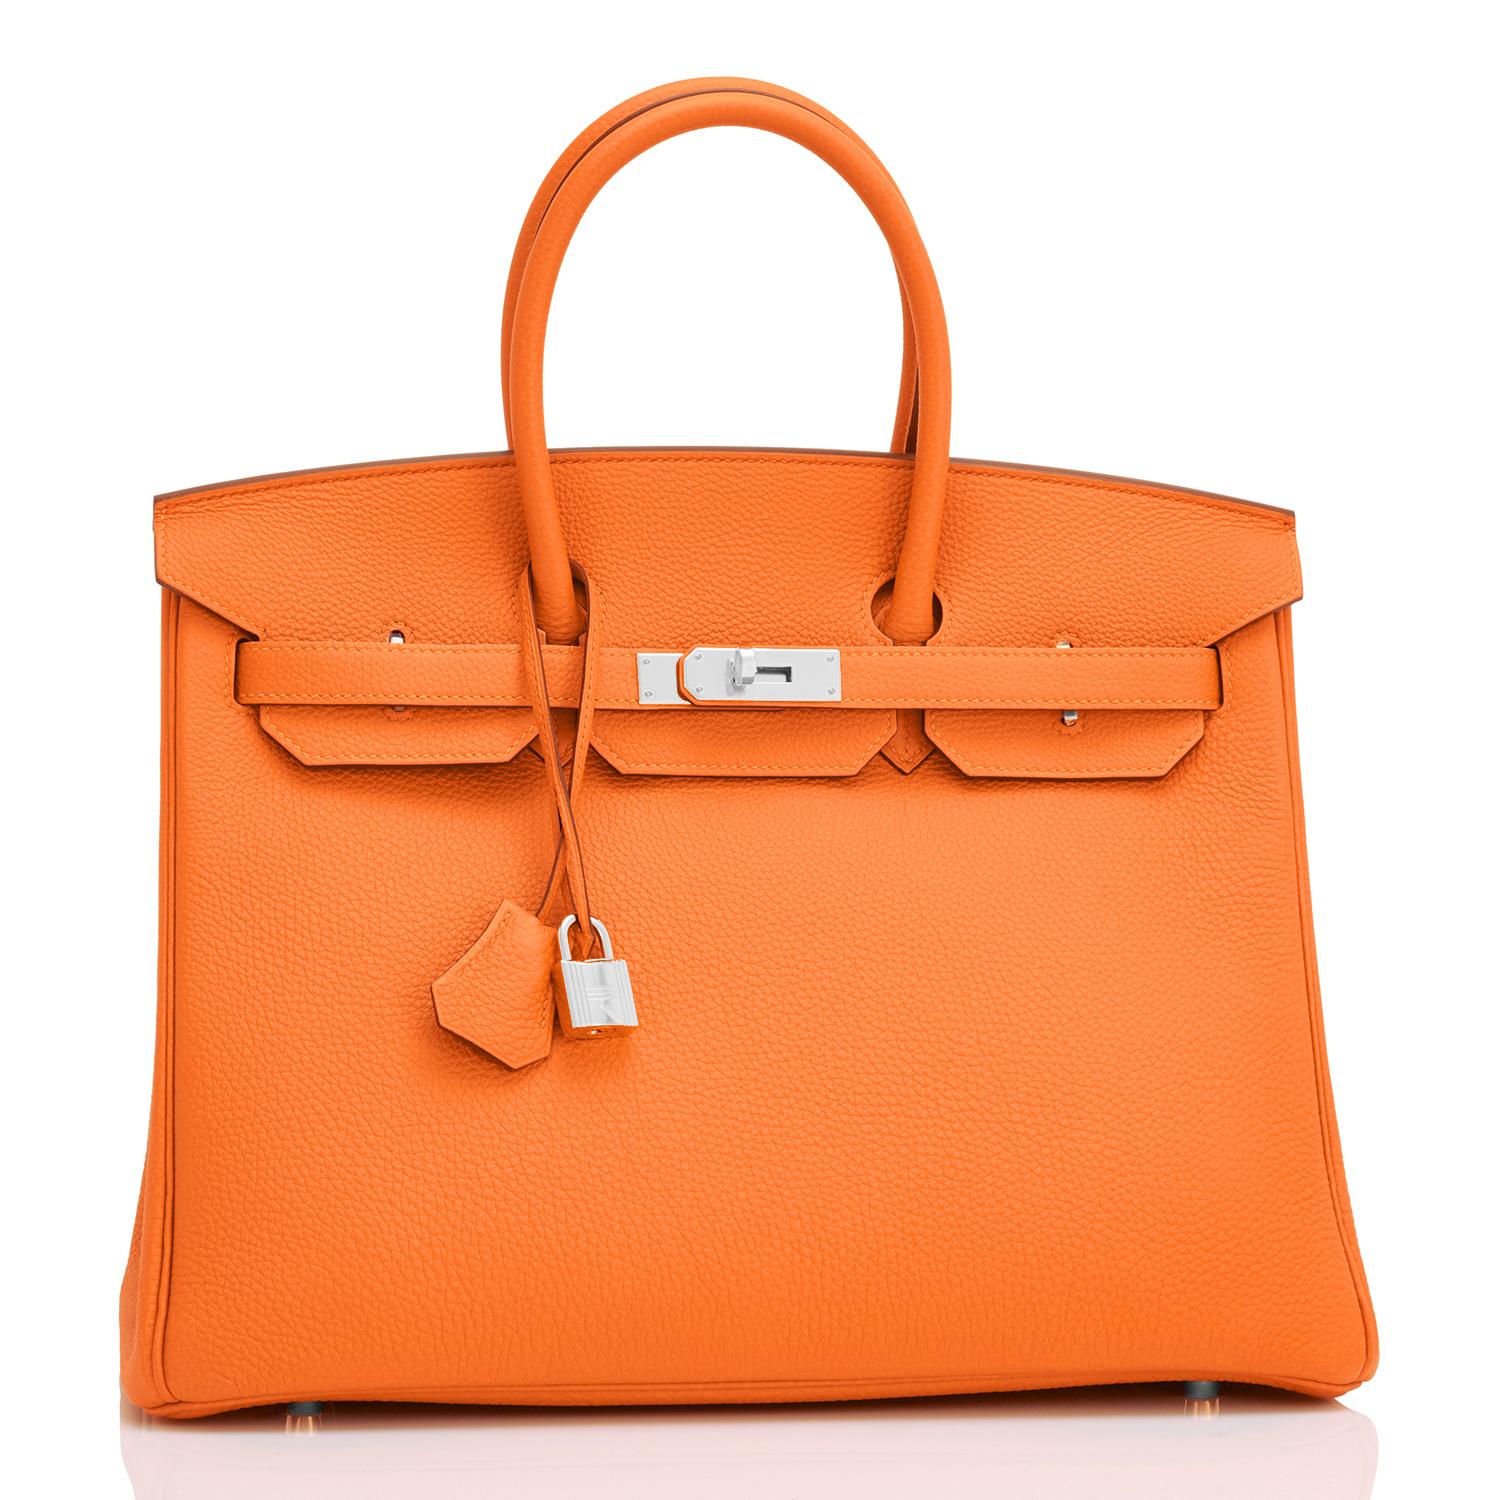 Hermes Classic Orange Togo 35cm Birkin Bag Palladium Hardware 
Extremely rare find in New or Never Worn condition (with plastic on hardware). 
Comes in full set with lock, keys, clochette, sleeper, raincoat, and Hermes box. 
This is the highly